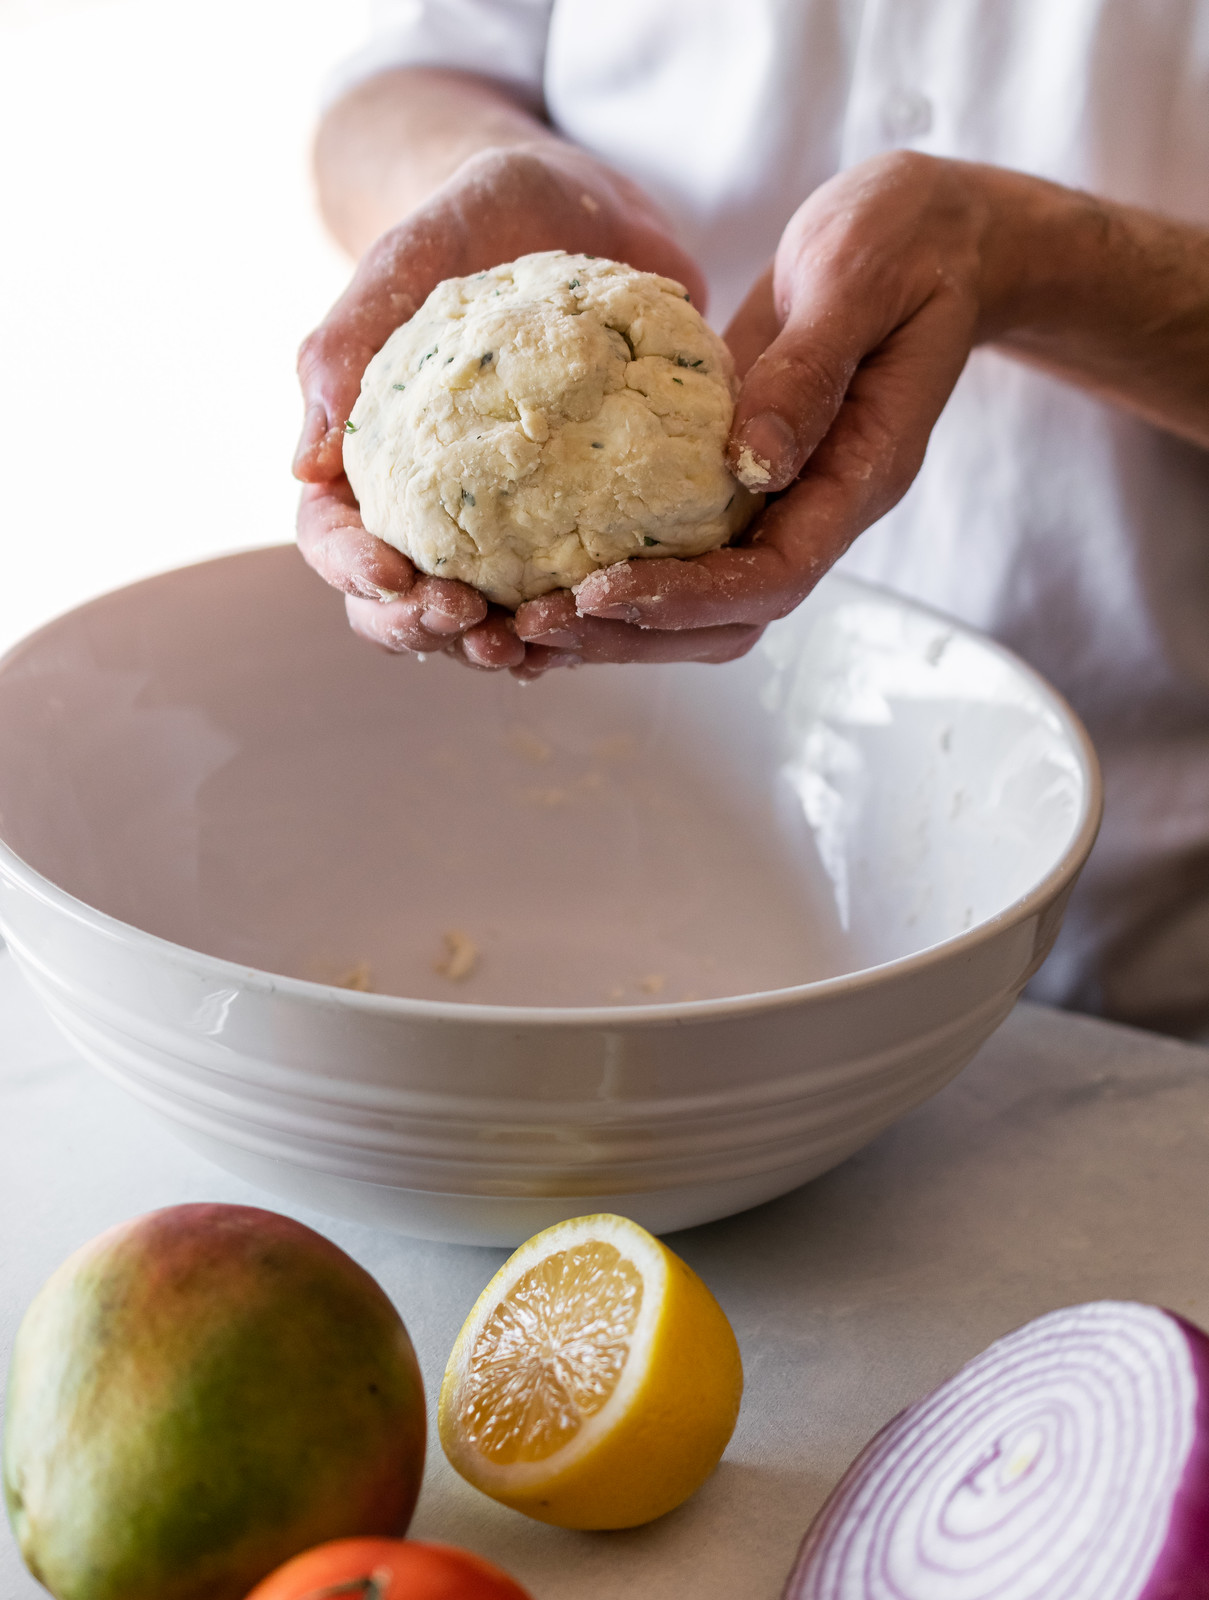 gather the dough into a ball, then wrap it in plastic